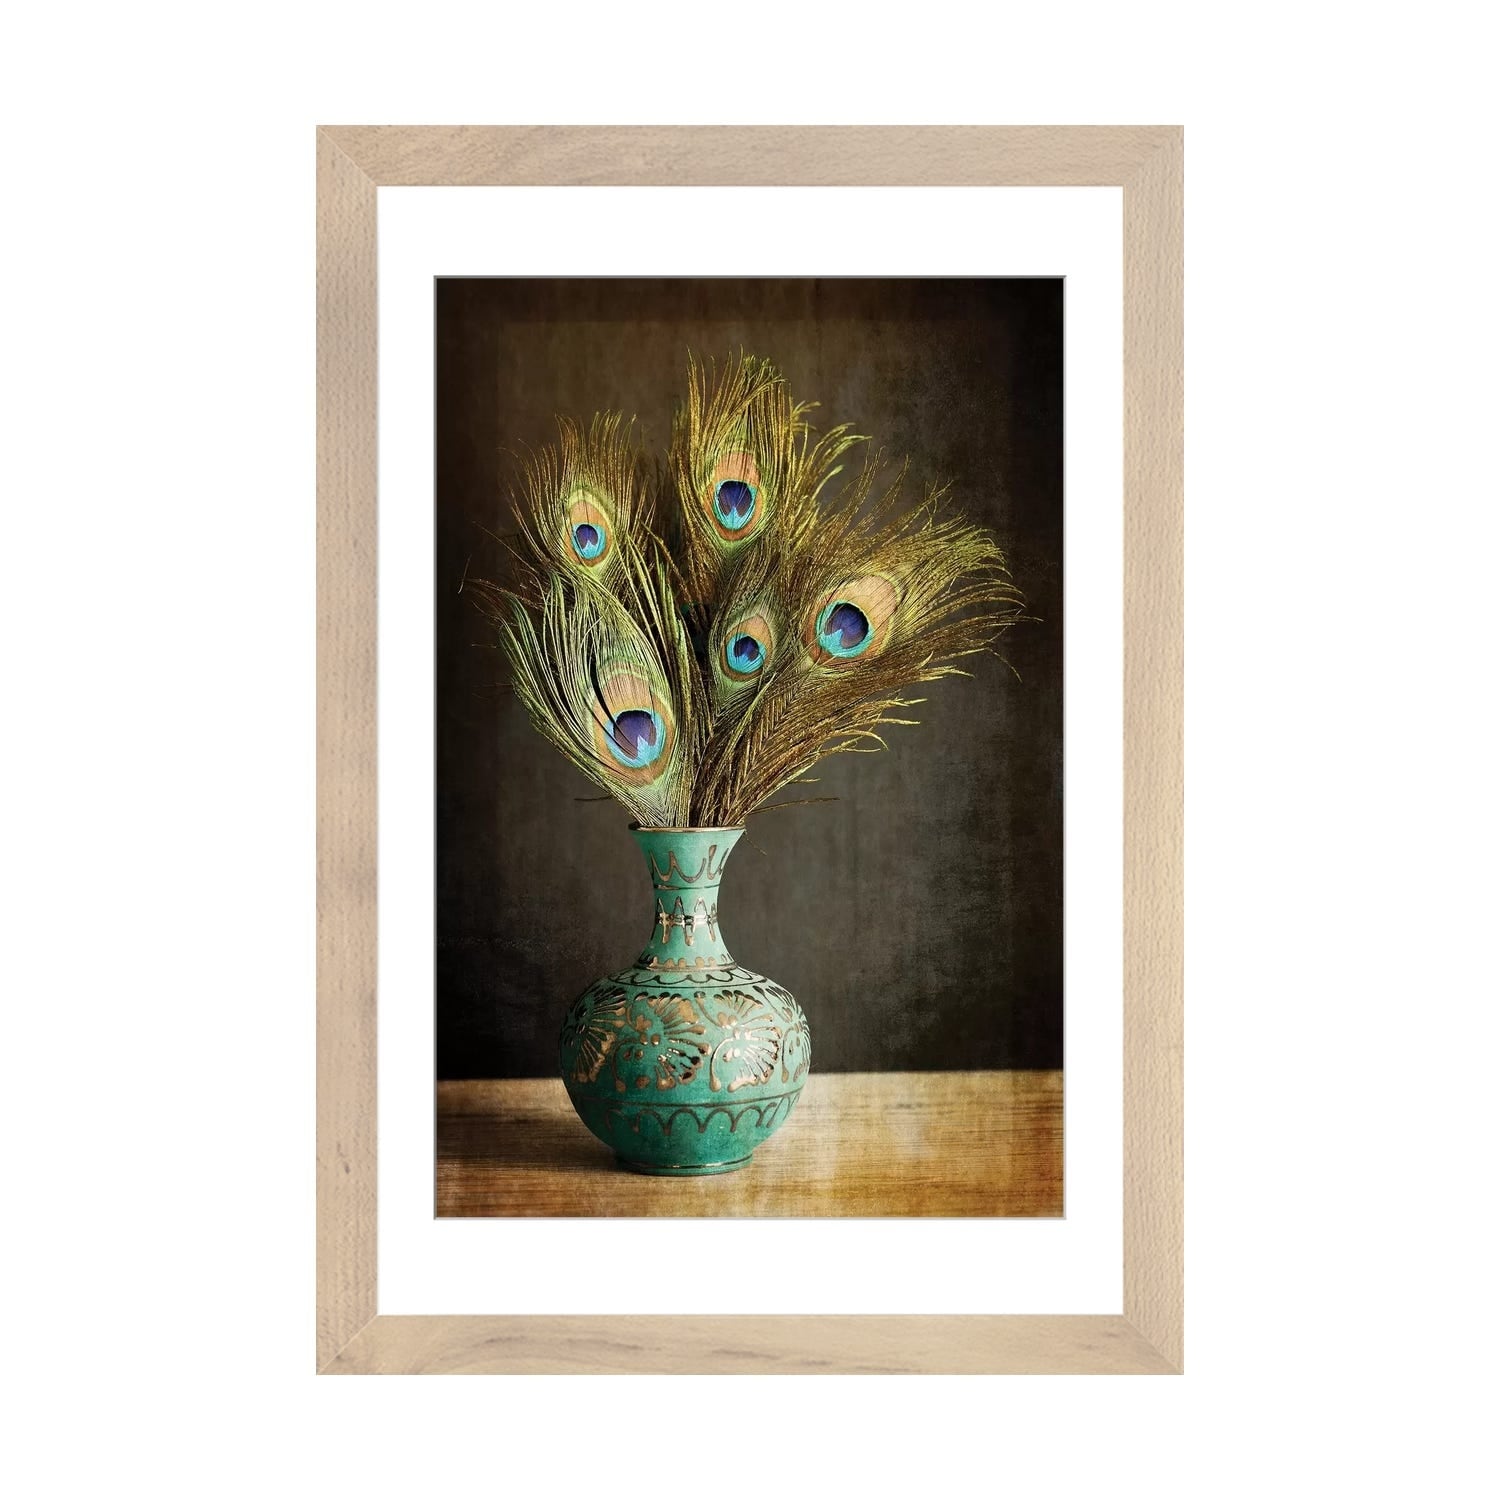 Peacock Feathers In Blue Vase by Tom Quartermaine